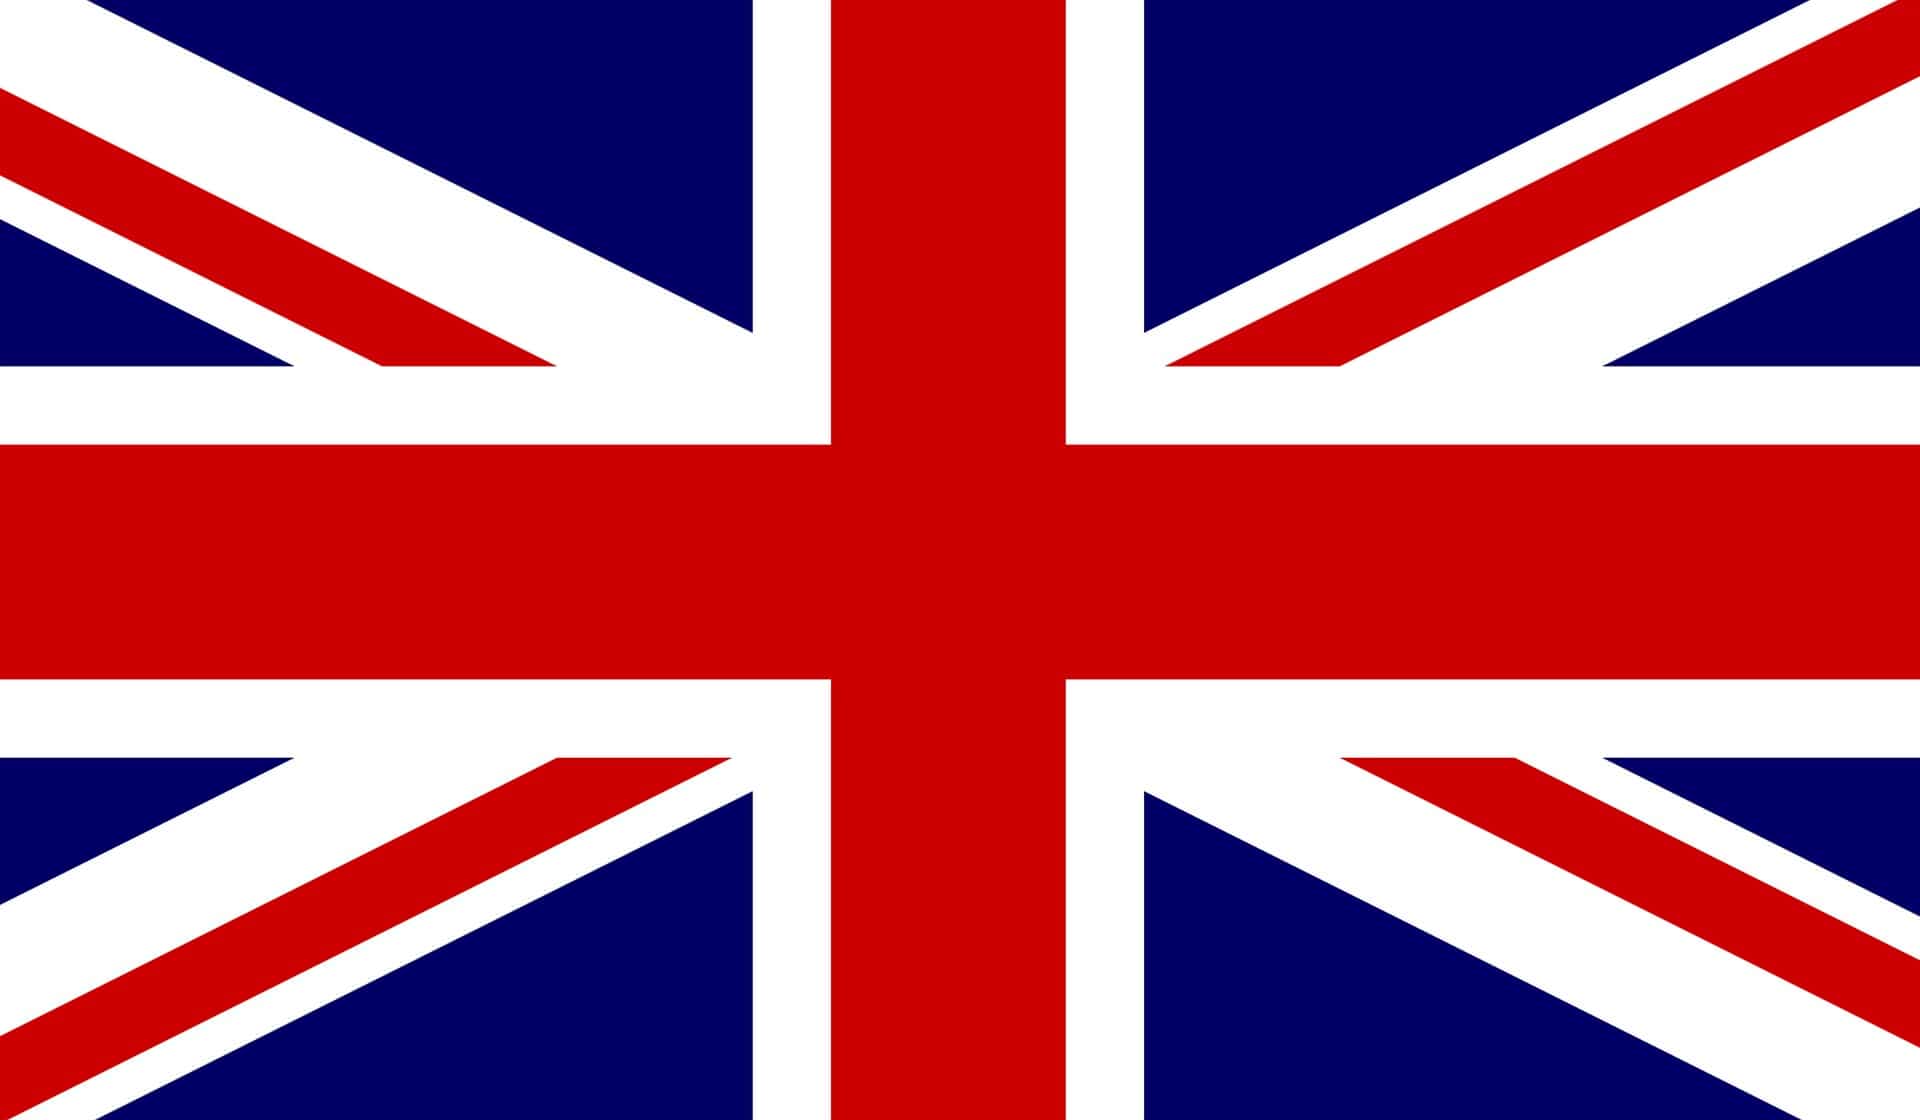 The british flag is shown on a white background with microwave radio frequency antennas.